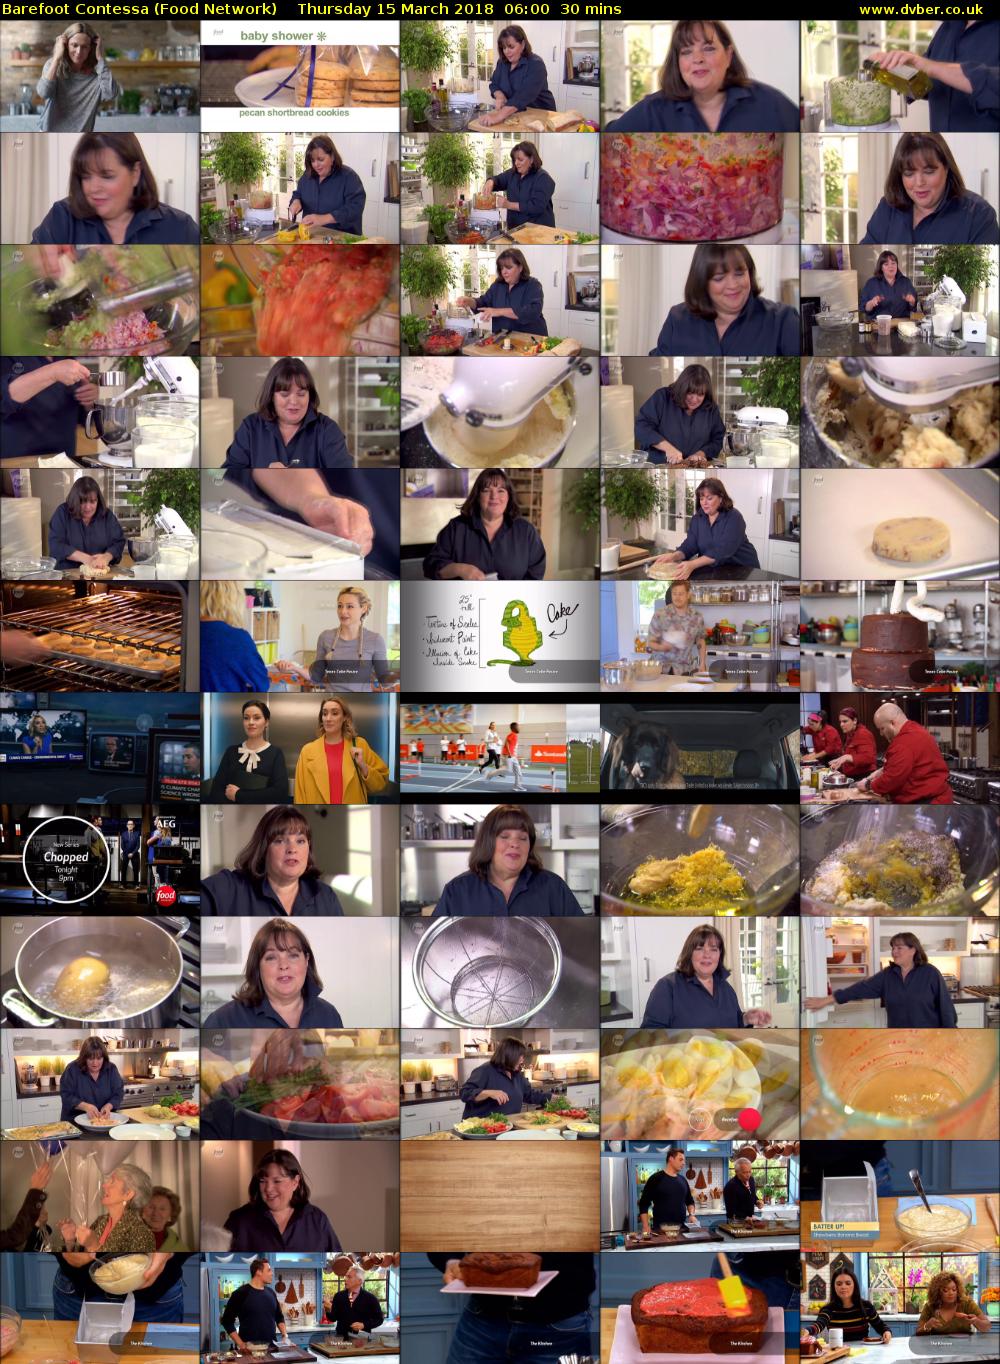 Barefoot Contessa (Food Network) Thursday 15 March 2018 06:00 - 06:30